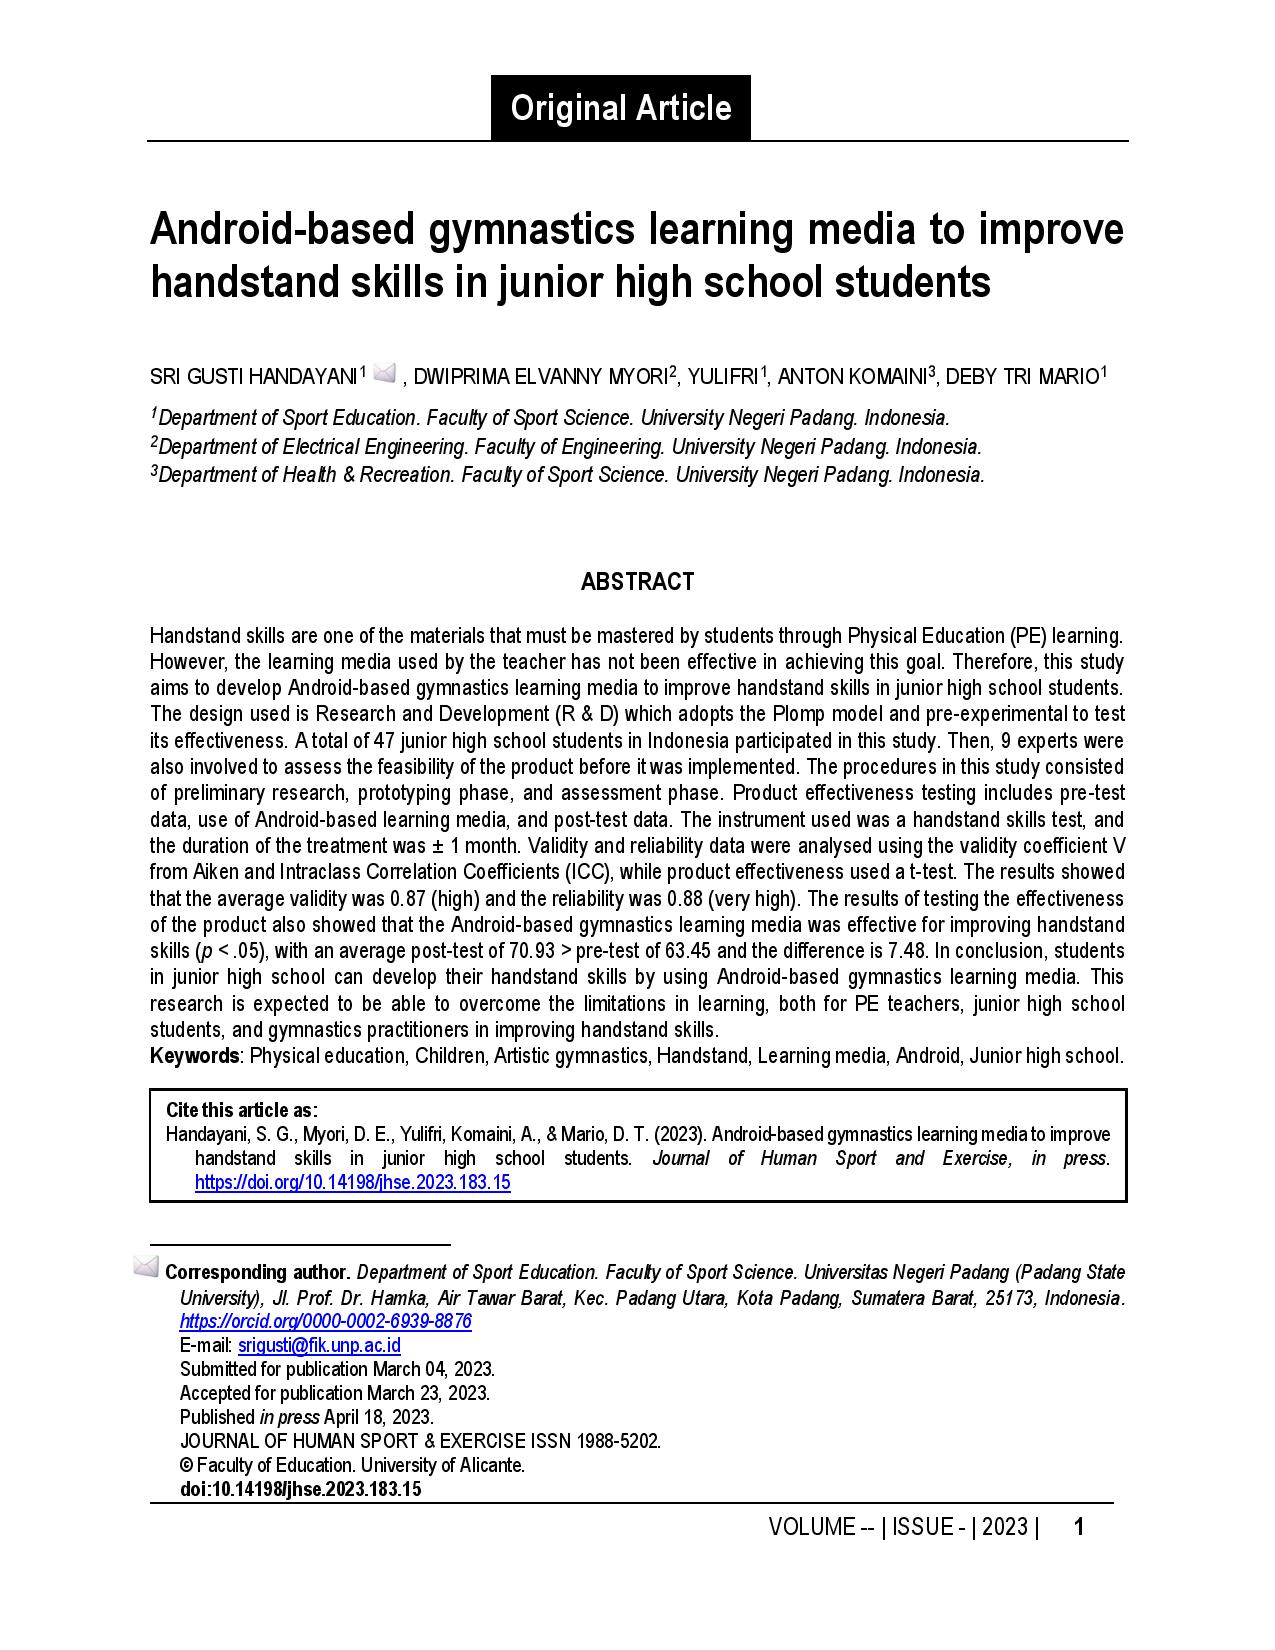 Android-based gymnastics learning media to improve handstand skills in junior high school students